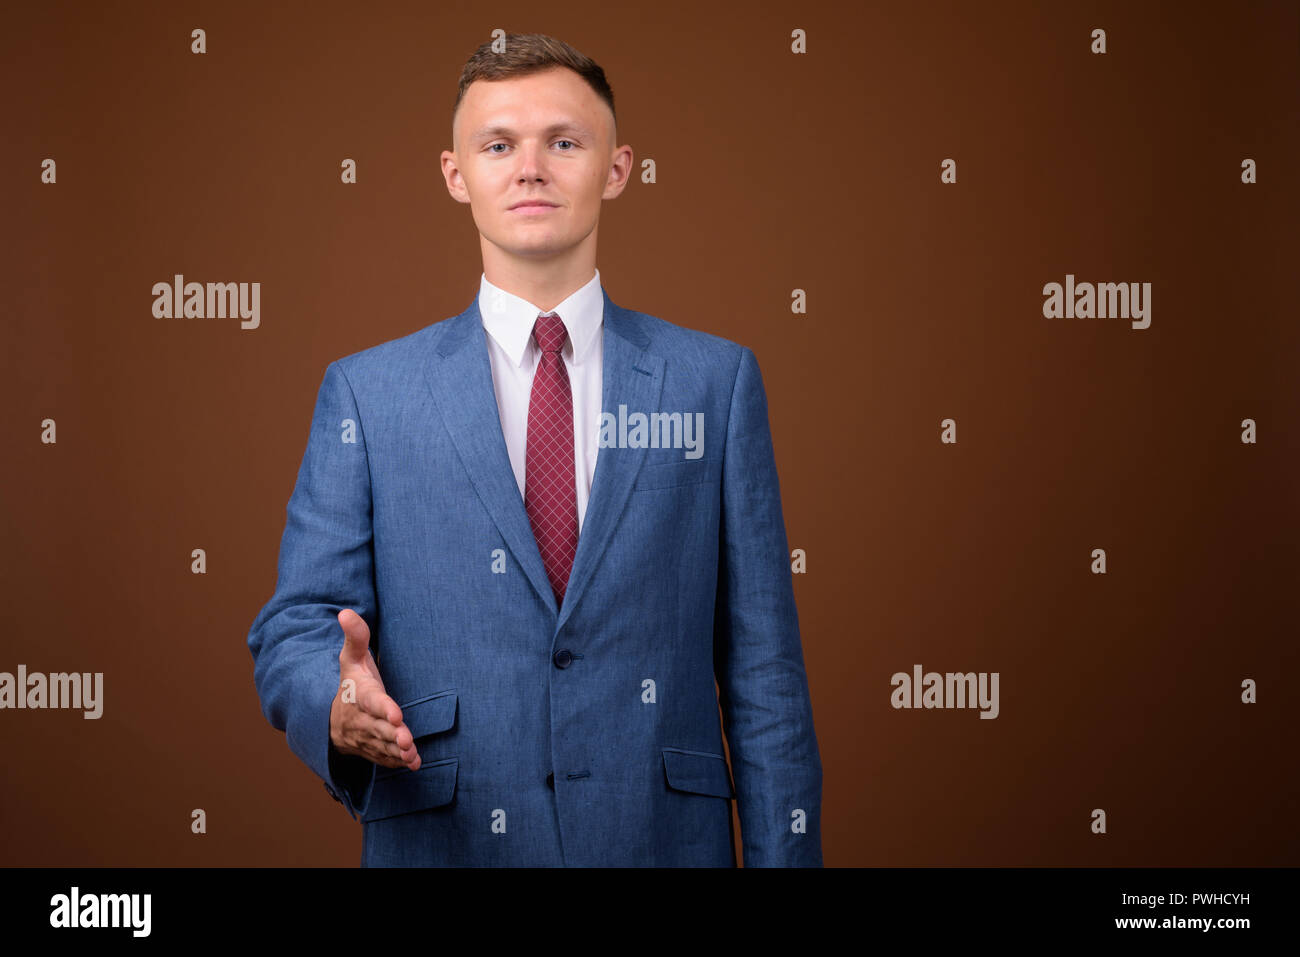 Young businessman wearing suit against brown background Stock Photo